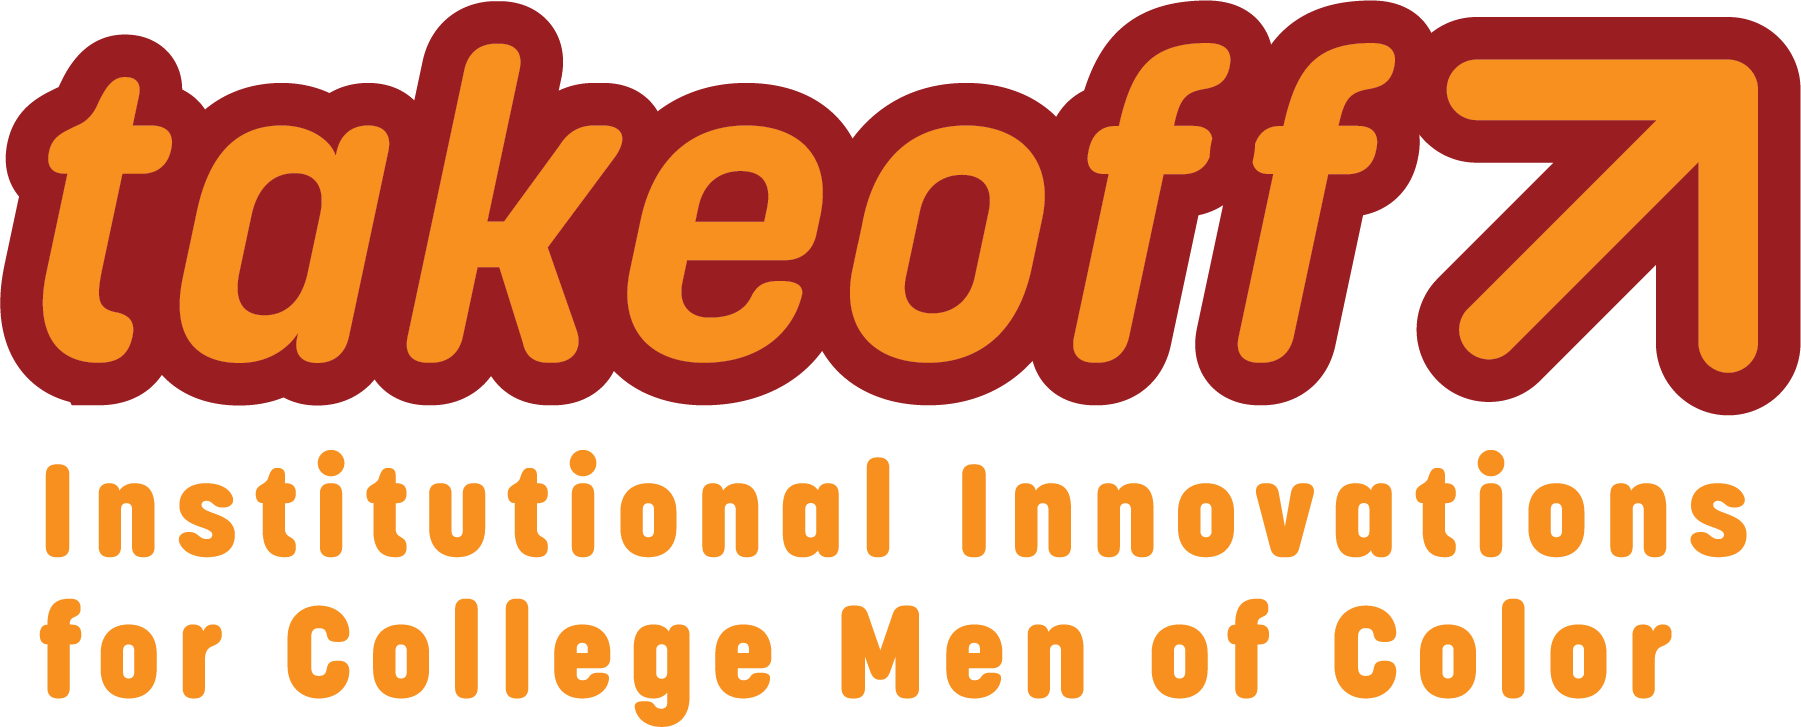 Takeoff - Institutional Innovations for College Men of Color